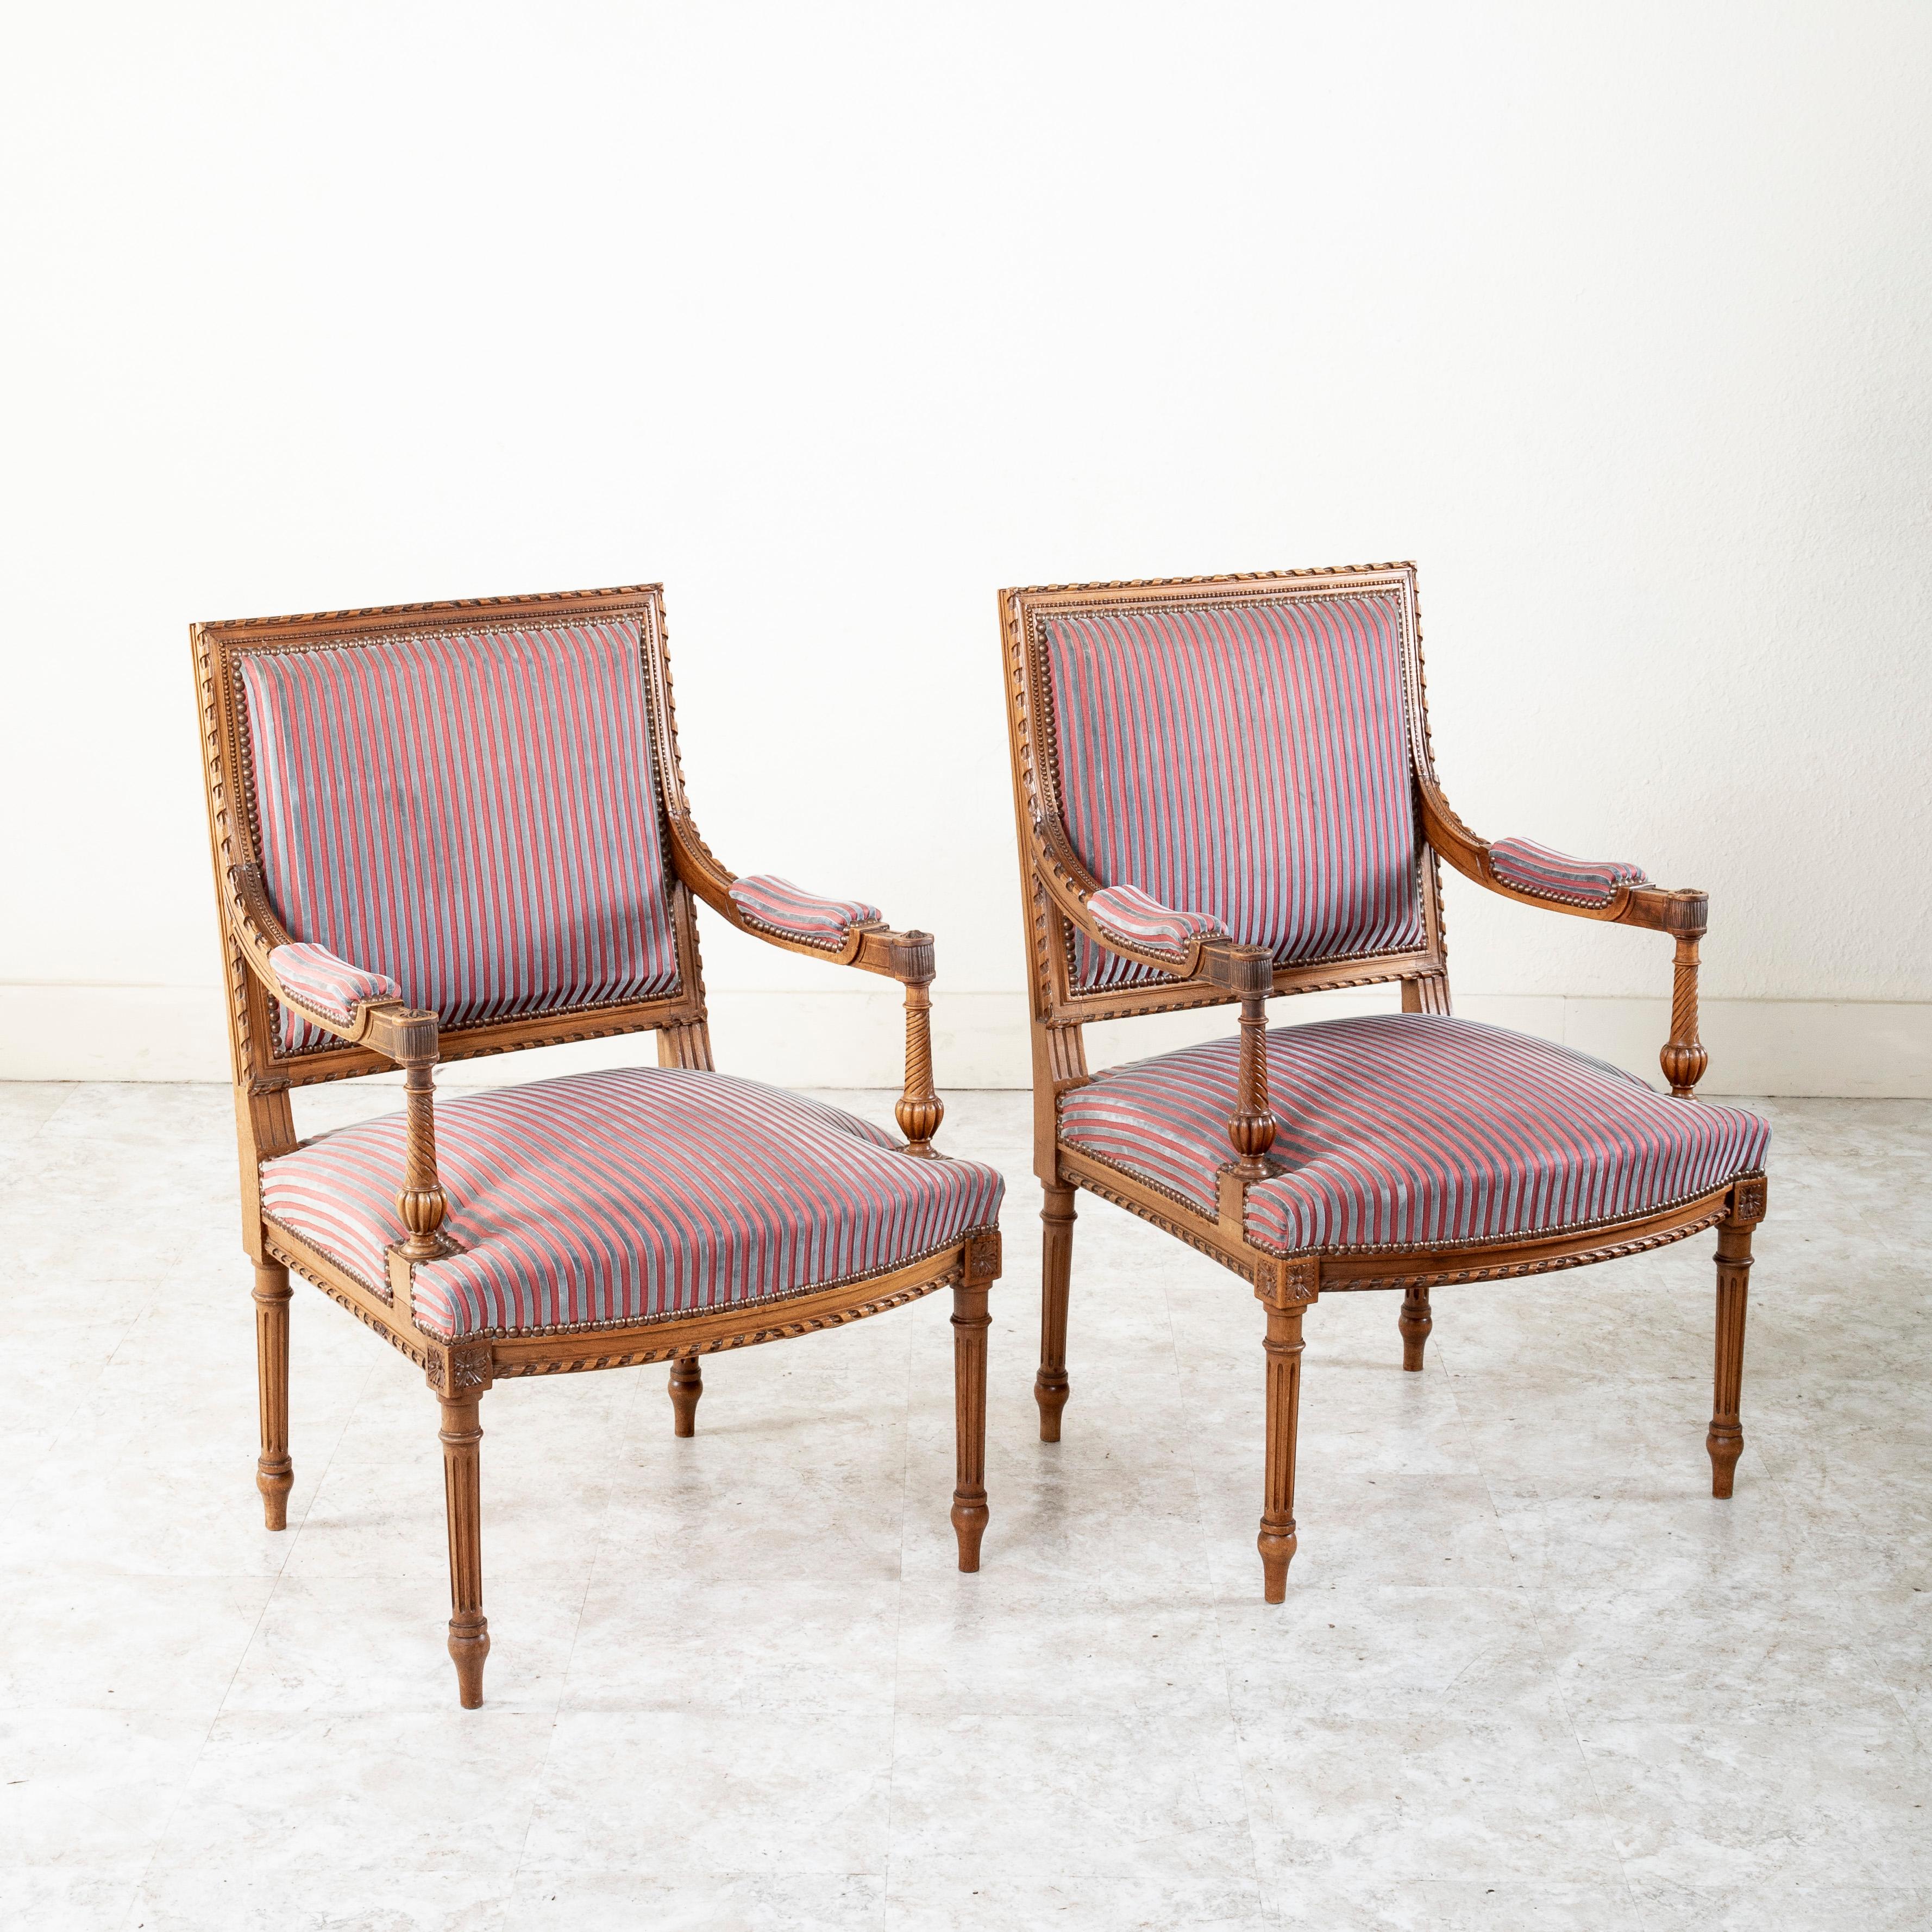 This pair of late nineteenth century French Louis XVI style armchairs is constructed of solid walnut. Their beautifully hand carved details include classic rosettes at the die joints and a twisted ribbon motif around the apron and seat backs. The